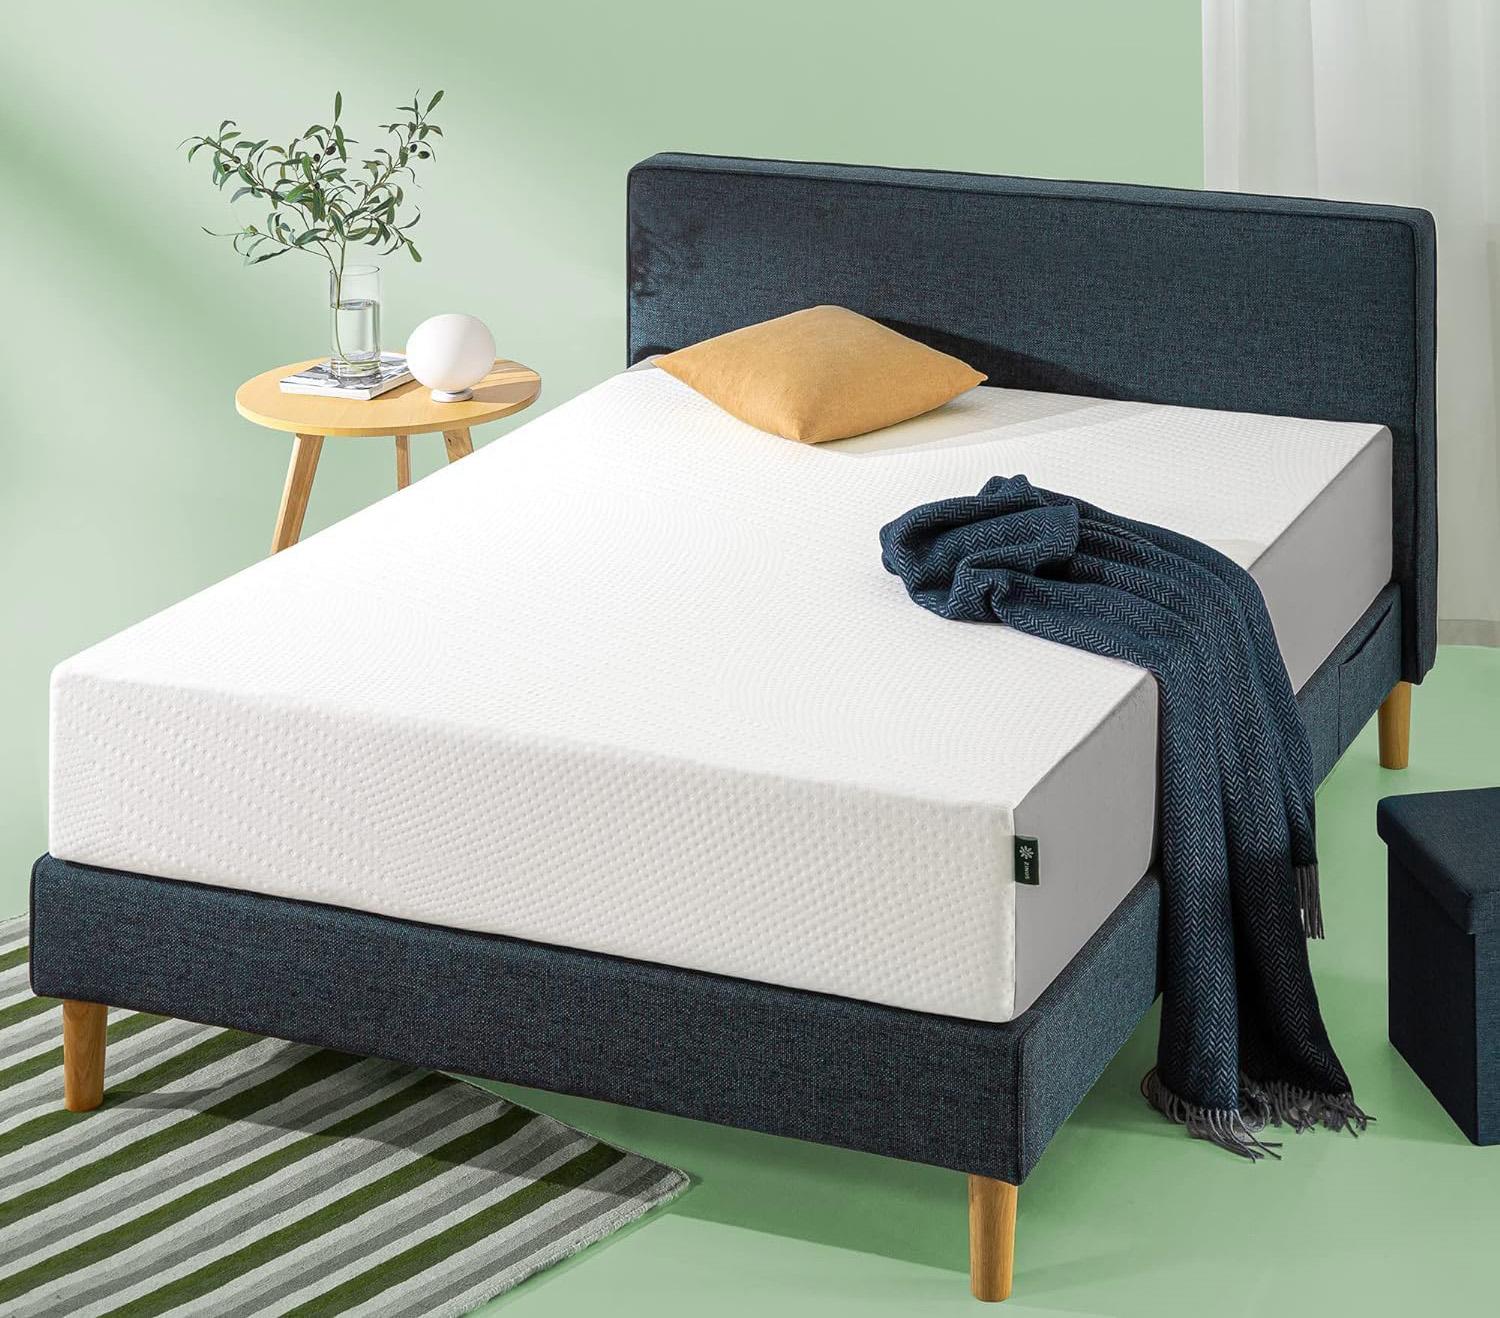 Zinus Cooling Essential Bed-in-a-Box 12in Foam Mattress for $299 Shipped